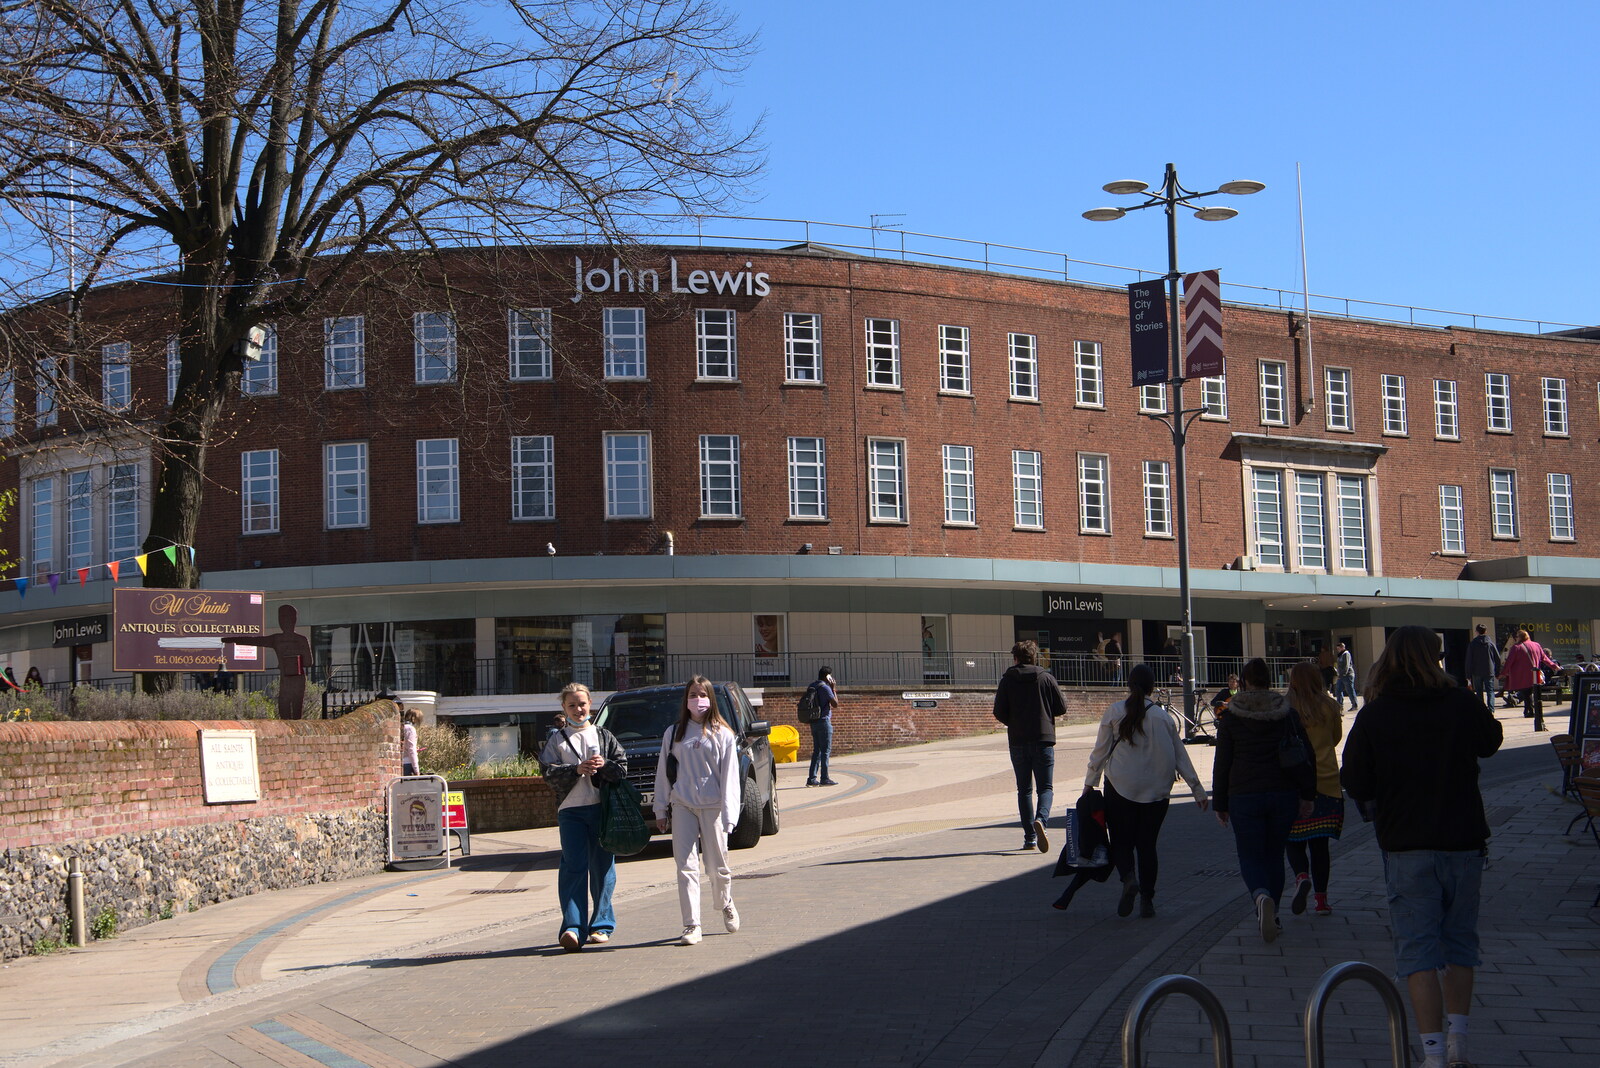 Looking up Westlegate to John Lewis on All Saints from The Death of Debenhams, Rampant Horse Street, Norwich, Norfolk - 17th April 2021